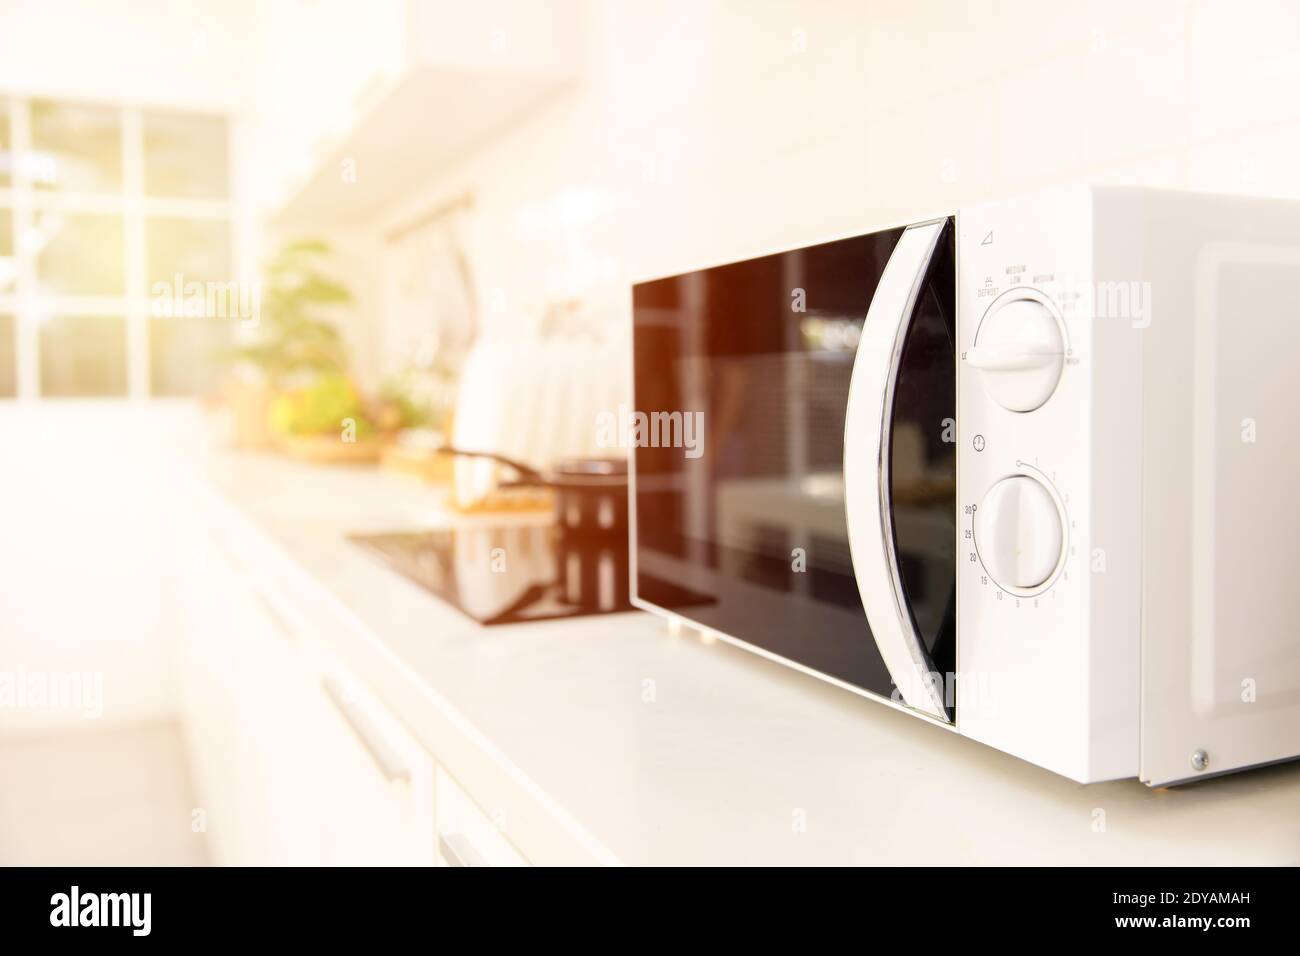 Kitchen counter closeup microwave oven cooking machine Stock Photo